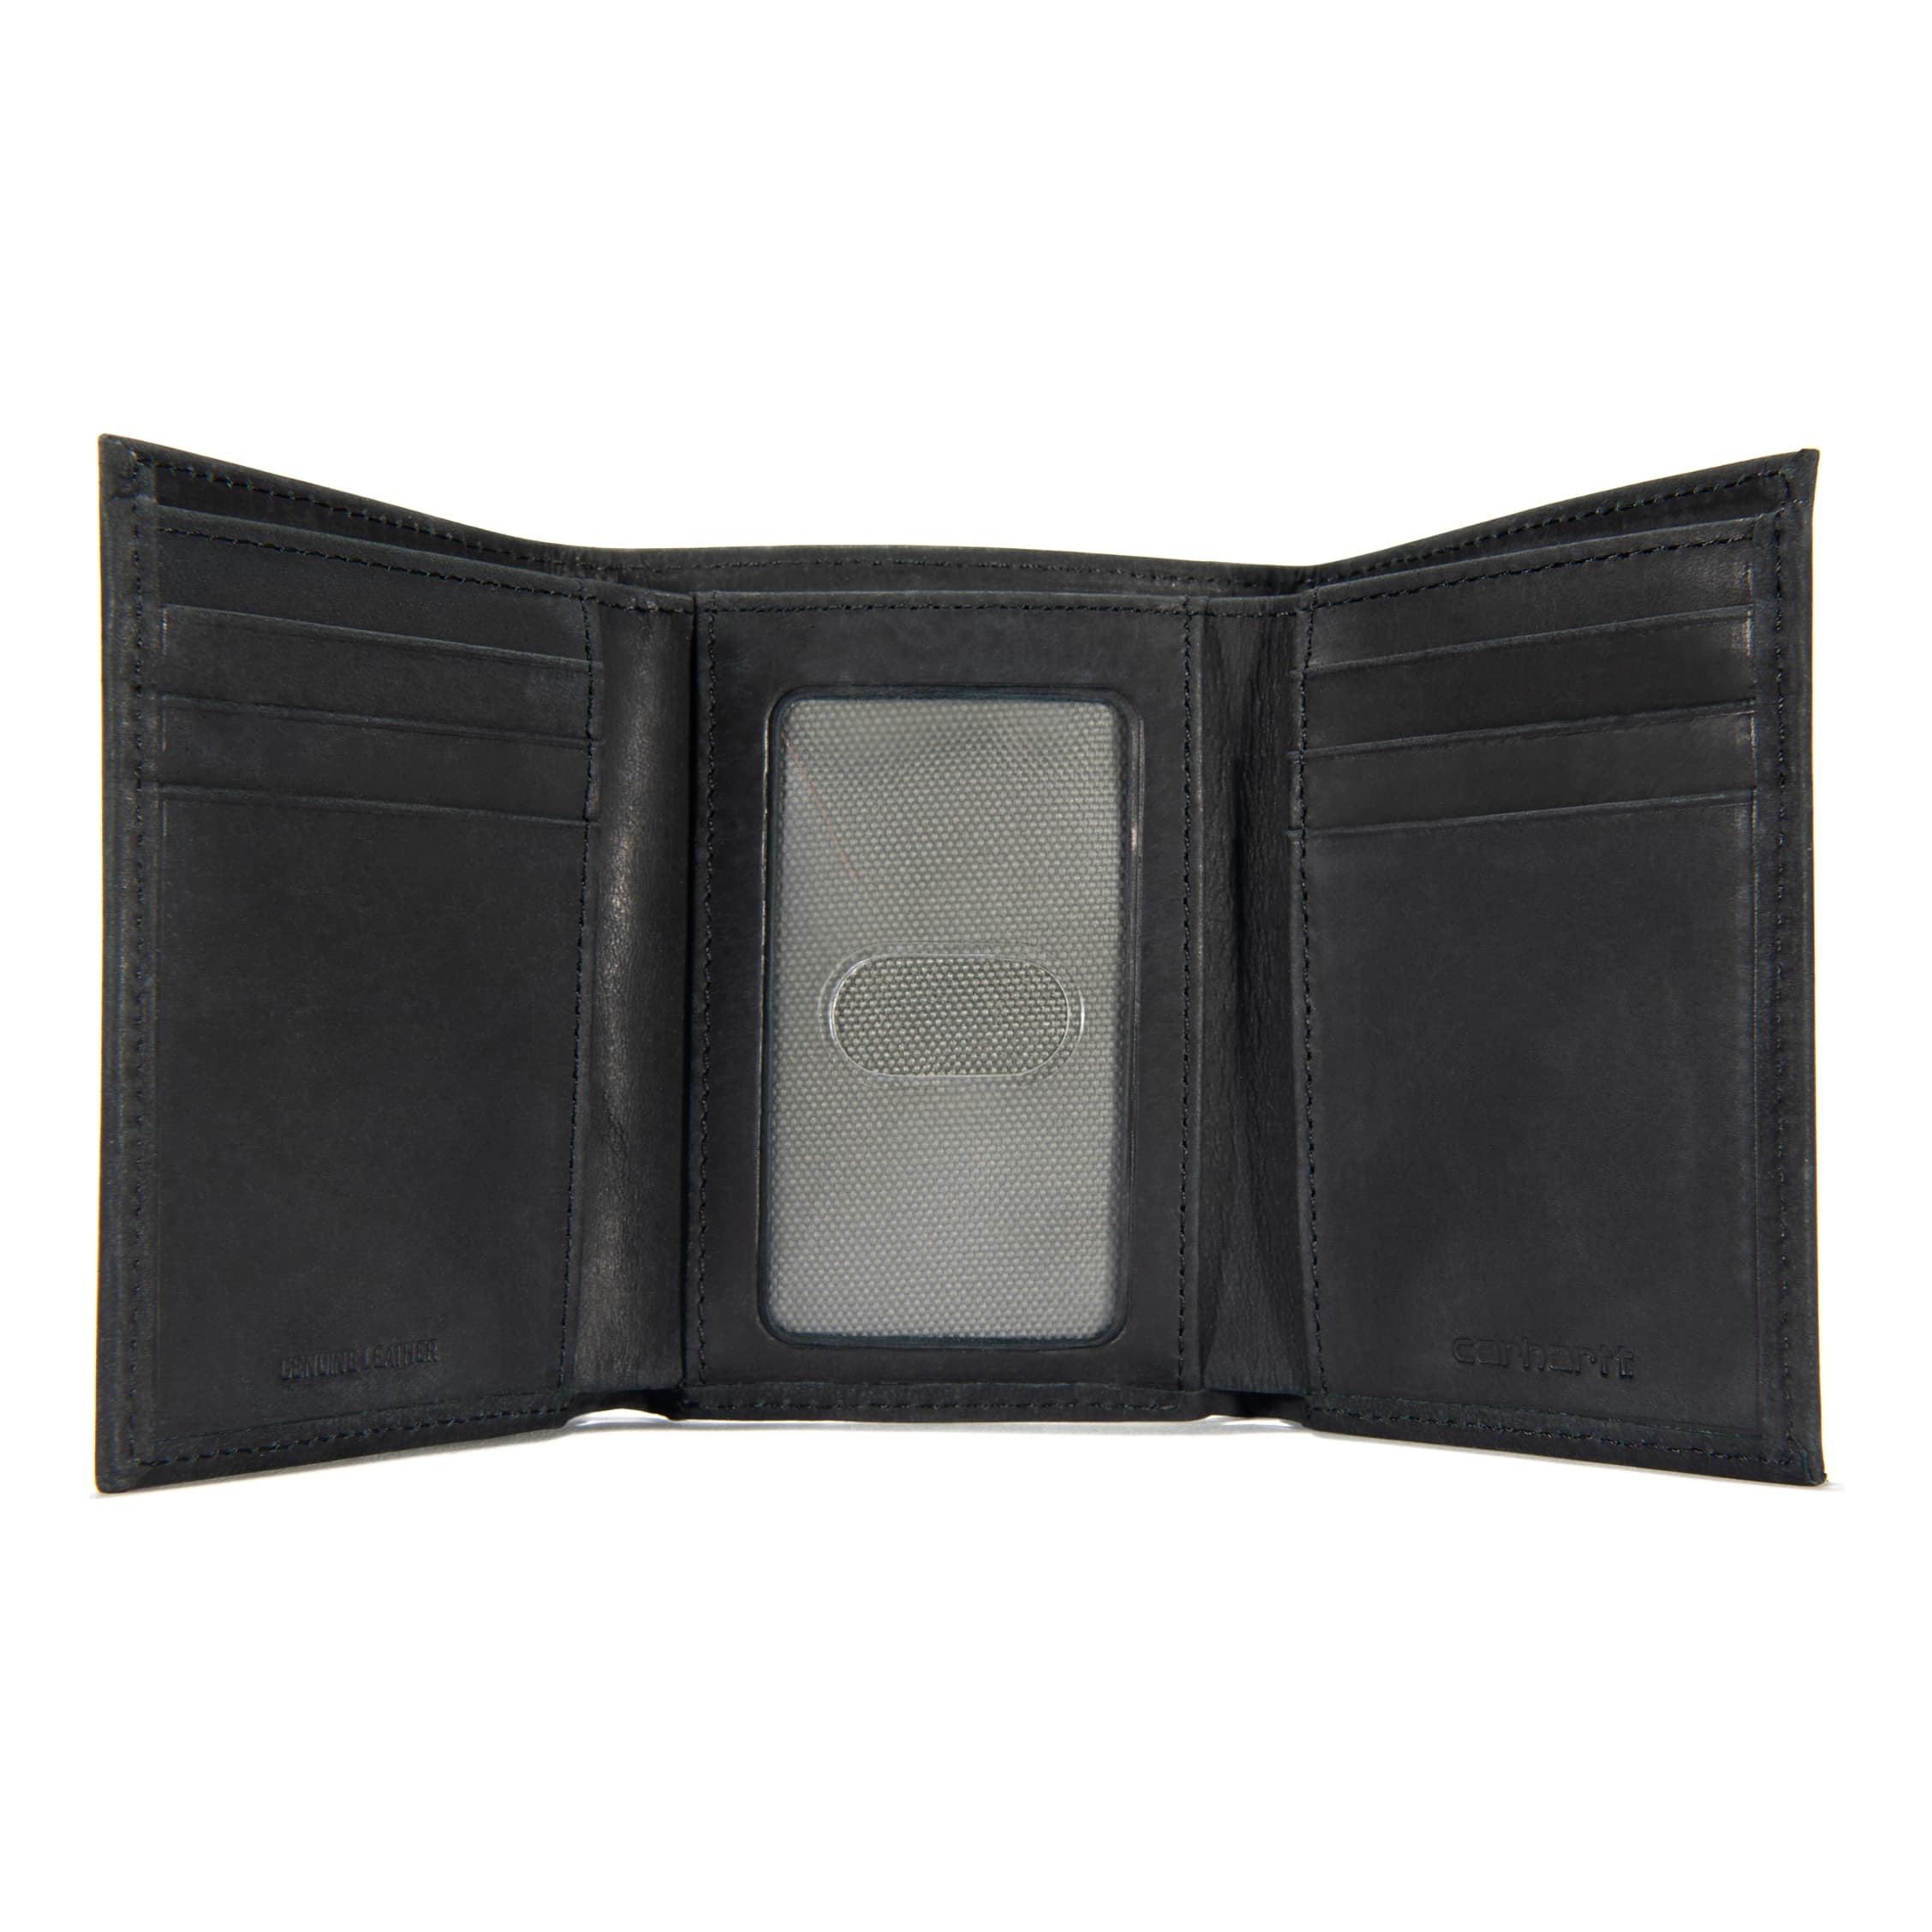 Carhartt Saddle Leather Trifold Wallet – Black